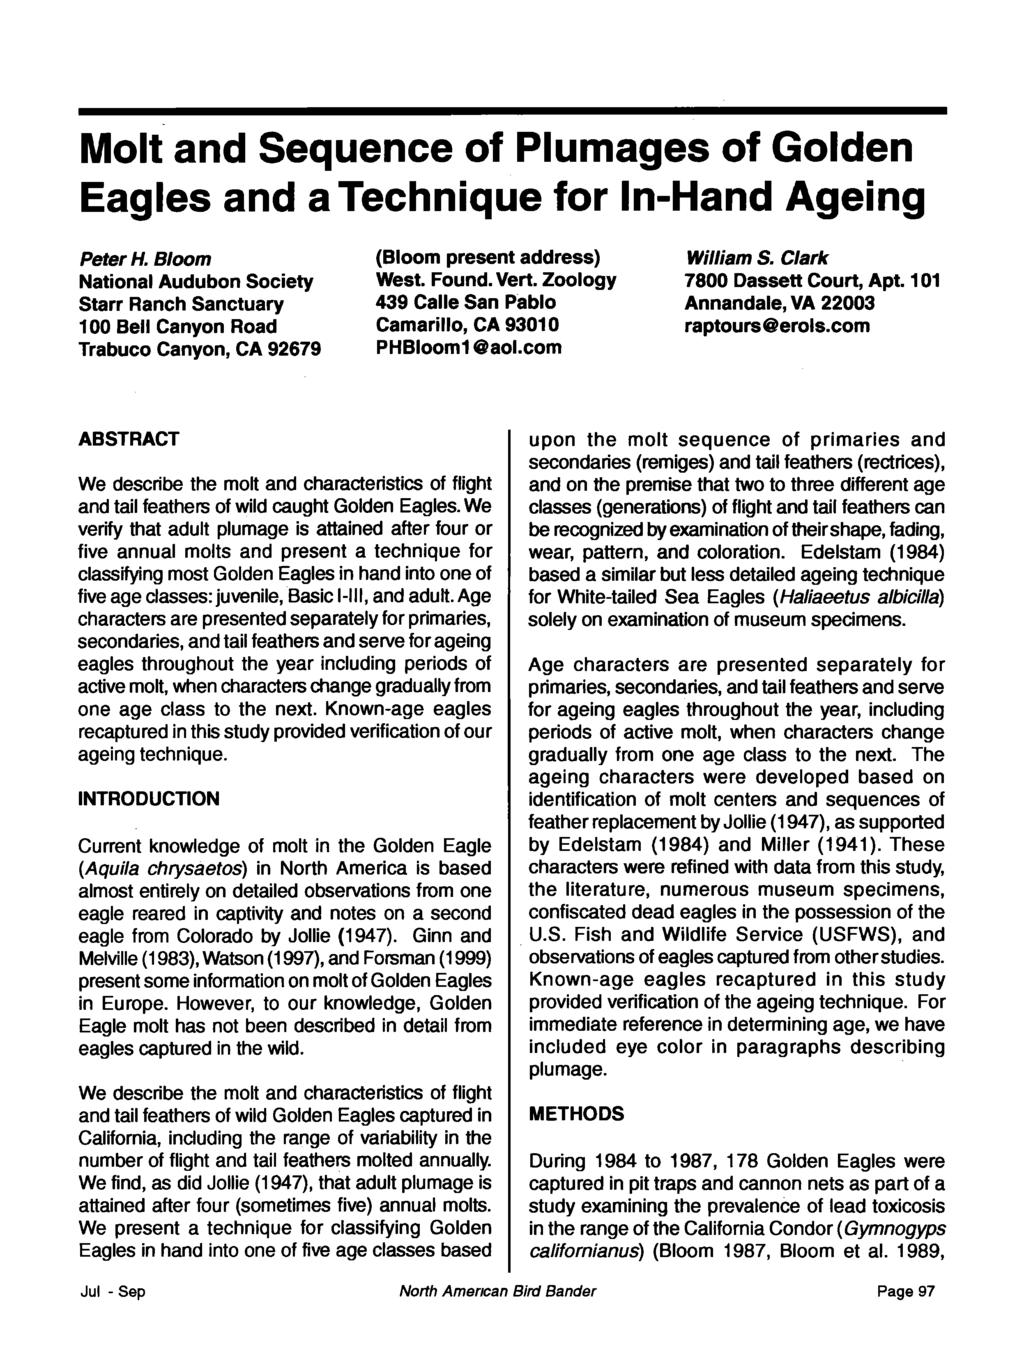 Molt and Sequence of Plumages of Golden Eagles and a Technique for In-Hand Ageing Peter H.